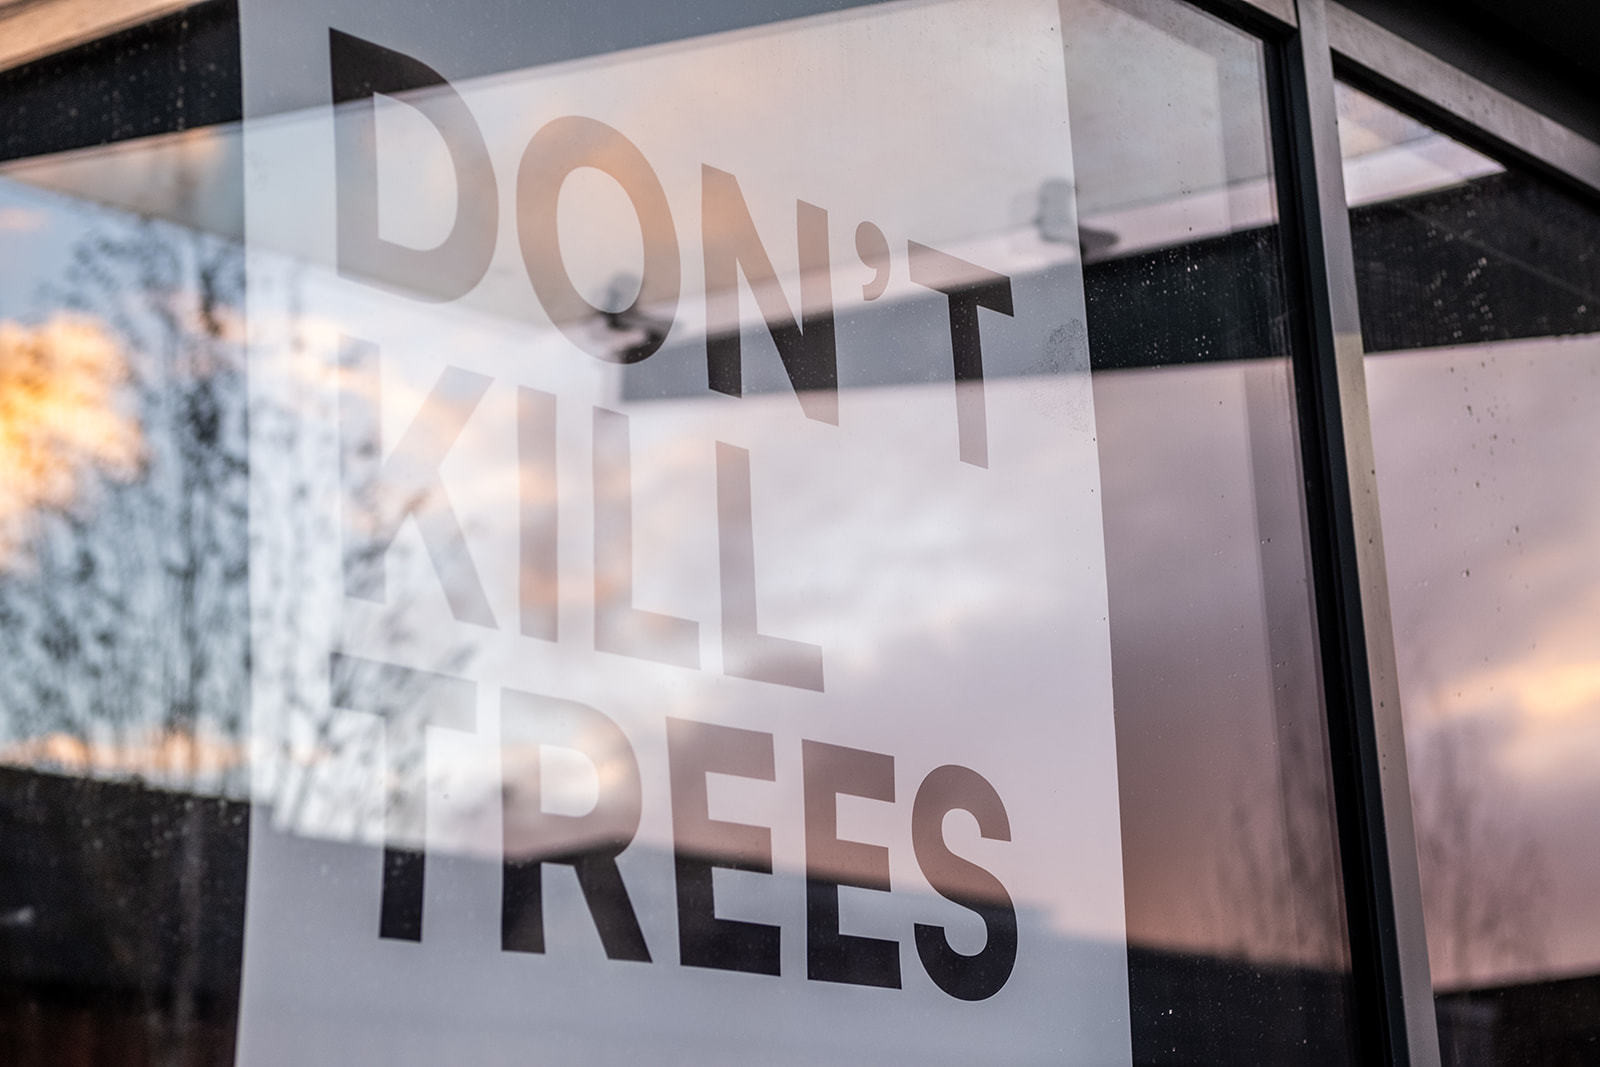 Poster reading 'Don't kill trees' in shop window